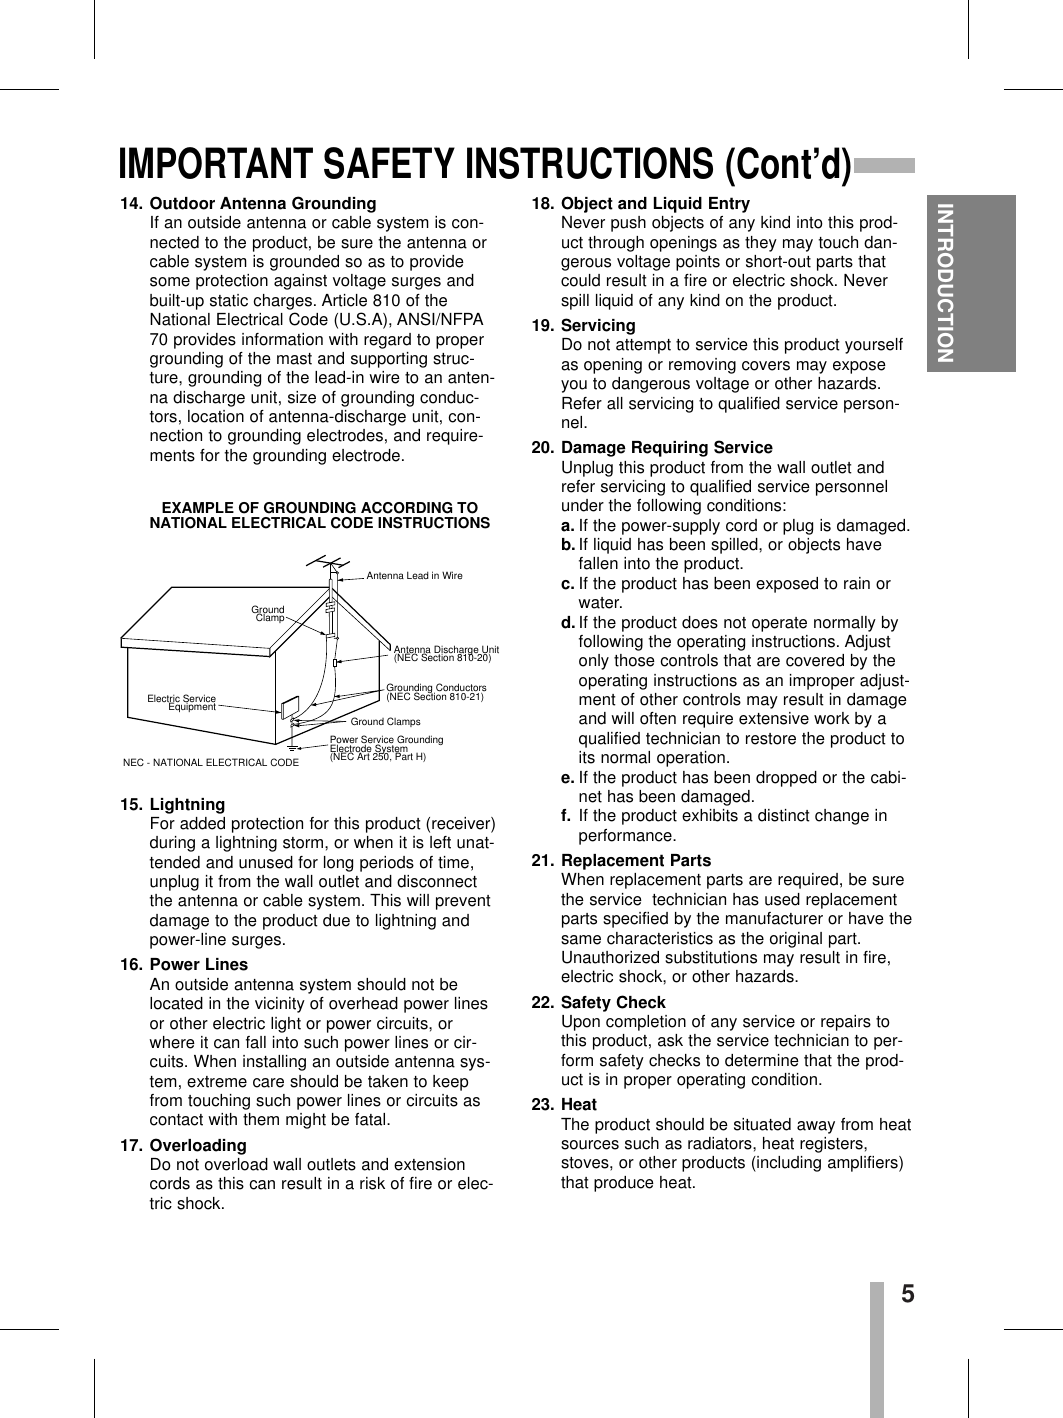 5INTRODUCTIONIMPORTANT SAFETY INSTRUCTIONS (Cont’d)14. Outdoor Antenna Grounding If an outside antenna or cable system is con-nected to the product, be sure the antenna orcable system is grounded so as to providesome protection against voltage surges andbuilt-up static charges. Article 810 of theNational Electrical Code (U.S.A), ANSI/NFPA70 provides information with regard to propergrounding of the mast and supporting struc-ture, grounding of the lead-in wire to an anten-na discharge unit, size of grounding conduc-tors, location of antenna-discharge unit, con-nection to grounding electrodes, and require-ments for the grounding electrode.15. Lightning For added protection for this product (receiver)during a lightning storm, or when it is left unat-tended and unused for long periods of time,unplug it from the wall outlet and disconnectthe antenna or cable system. This will preventdamage to the product due to lightning andpower-line surges.16. Power Lines An outside antenna system should not belocated in the vicinity of overhead power linesor other electric light or power circuits, orwhere it can fall into such power lines or cir-cuits. When installing an outside antenna sys-tem, extreme care should be taken to keepfrom touching such power lines or circuits ascontact with them might be fatal.17. Overloading Do not overload wall outlets and extensioncords as this can result in a risk of fire or elec-tric shock.18. Object and Liquid EntryNever push objects of any kind into this prod-uct through openings as they may touch dan-gerous voltage points or short-out parts thatcould result in a fire or electric shock. Neverspill liquid of any kind on the product.19. Servicing Do not attempt to service this product yourselfas opening or removing covers may exposeyou to dangerous voltage or other hazards.Refer all servicing to qualified service person-nel.20. Damage Requiring ServiceUnplug this product from the wall outlet andrefer servicing to qualified service personnelunder the following conditions:a. If the power-supply cord or plug is damaged.b. If liquid has been spilled, or objects havefallen into the product.c. If the product has been exposed to rain orwater.d. If the product does not operate normally byfollowing the operating instructions. Adjustonly those controls that are covered by theoperating instructions as an improper adjust-ment of other controls may result in damageand will often require extensive work by aqualified technician to restore the product toits normal operation.e. If the product has been dropped or the cabi-net has been damaged.f. If the product exhibits a distinct change inperformance.21. Replacement PartsWhen replacement parts are required, be surethe service  technician has used replacementparts specified by the manufacturer or have thesame characteristics as the original part.Unauthorized substitutions may result in fire,electric shock, or other hazards.22. Safety Check Upon completion of any service or repairs tothis product, ask the service technician to per-form safety checks to determine that the prod-uct is in proper operating condition.23. HeatThe product should be situated away from heatsources such as radiators, heat registers,stoves, or other products (including amplifiers)that produce heat.Antenna Lead in WireAntenna Discharge Unit(NEC Section 810-20) Grounding Conductors(NEC Section 810-21)Ground ClampsPower Service Grounding Electrode System (NEC Art 250, Part H)GroundClampElectric ServiceEquipmentNEC - NATIONAL ELECTRICAL CODEEXAMPLE OF GROUNDING ACCORDING TONATIONAL ELECTRICAL CODE INSTRUCTIONS